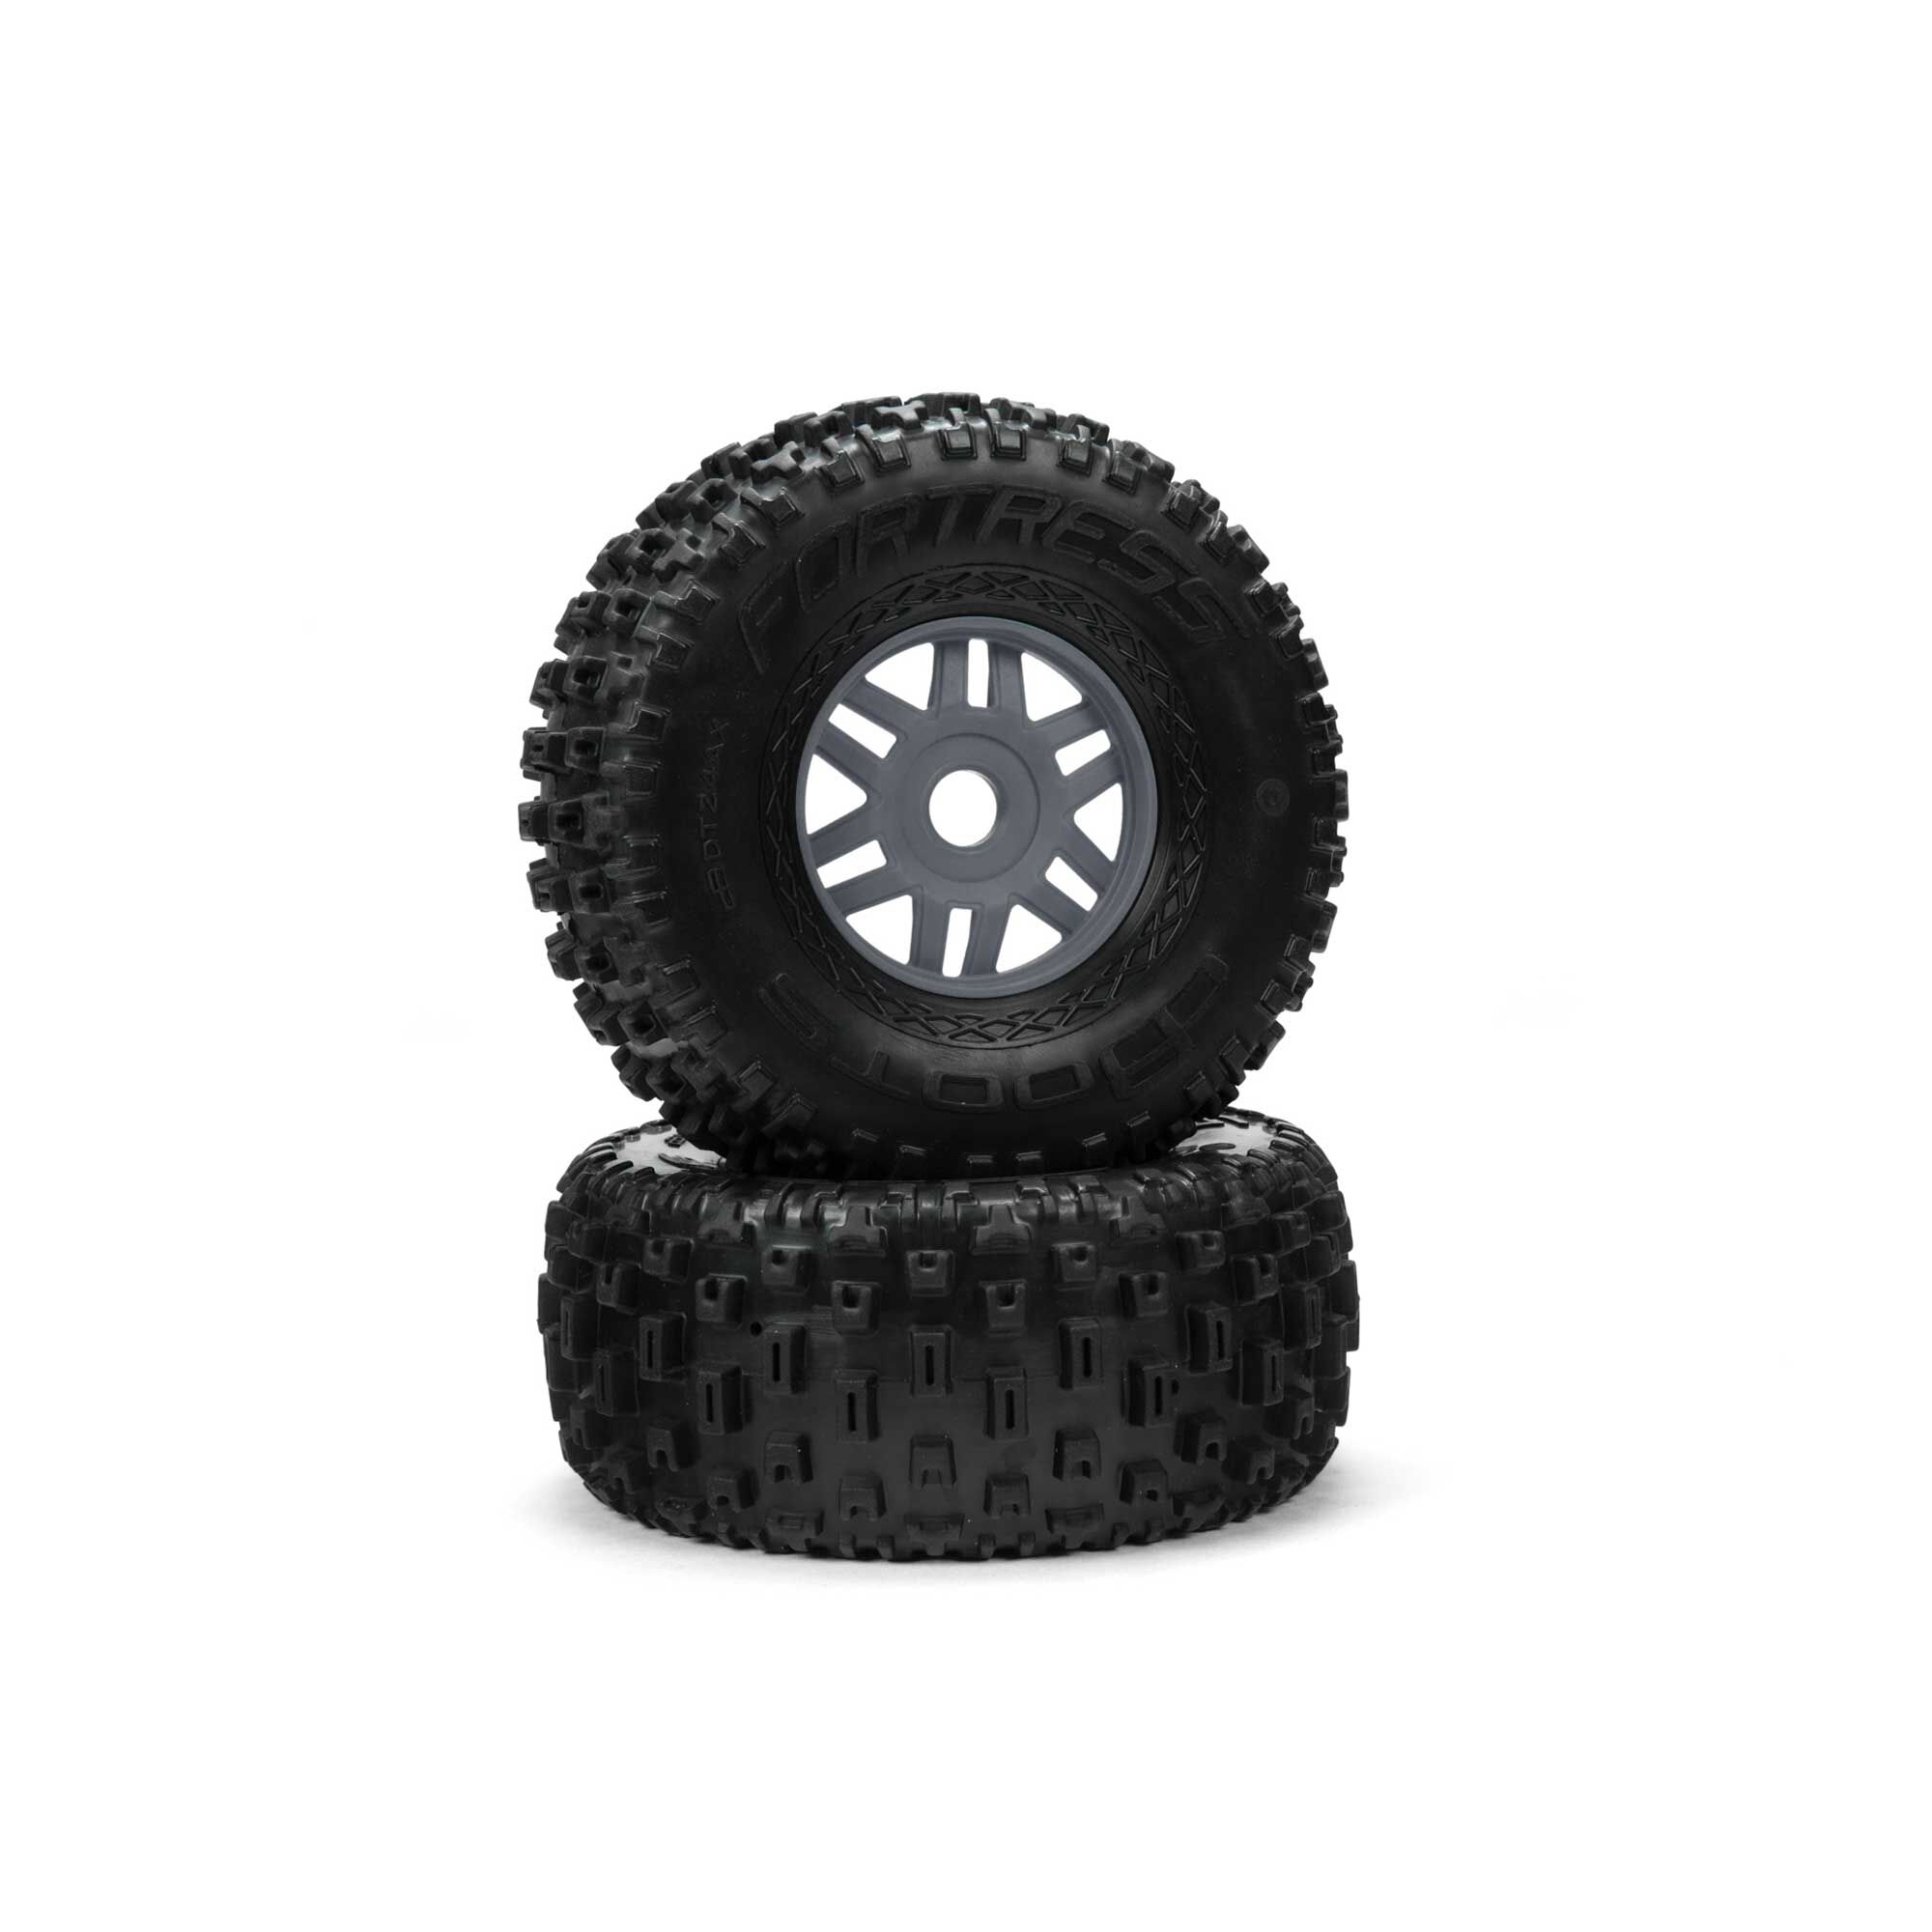 for sale online ARRMA AR550042 1:10 Dbooots Fortress SC Tire Set 2 pc 